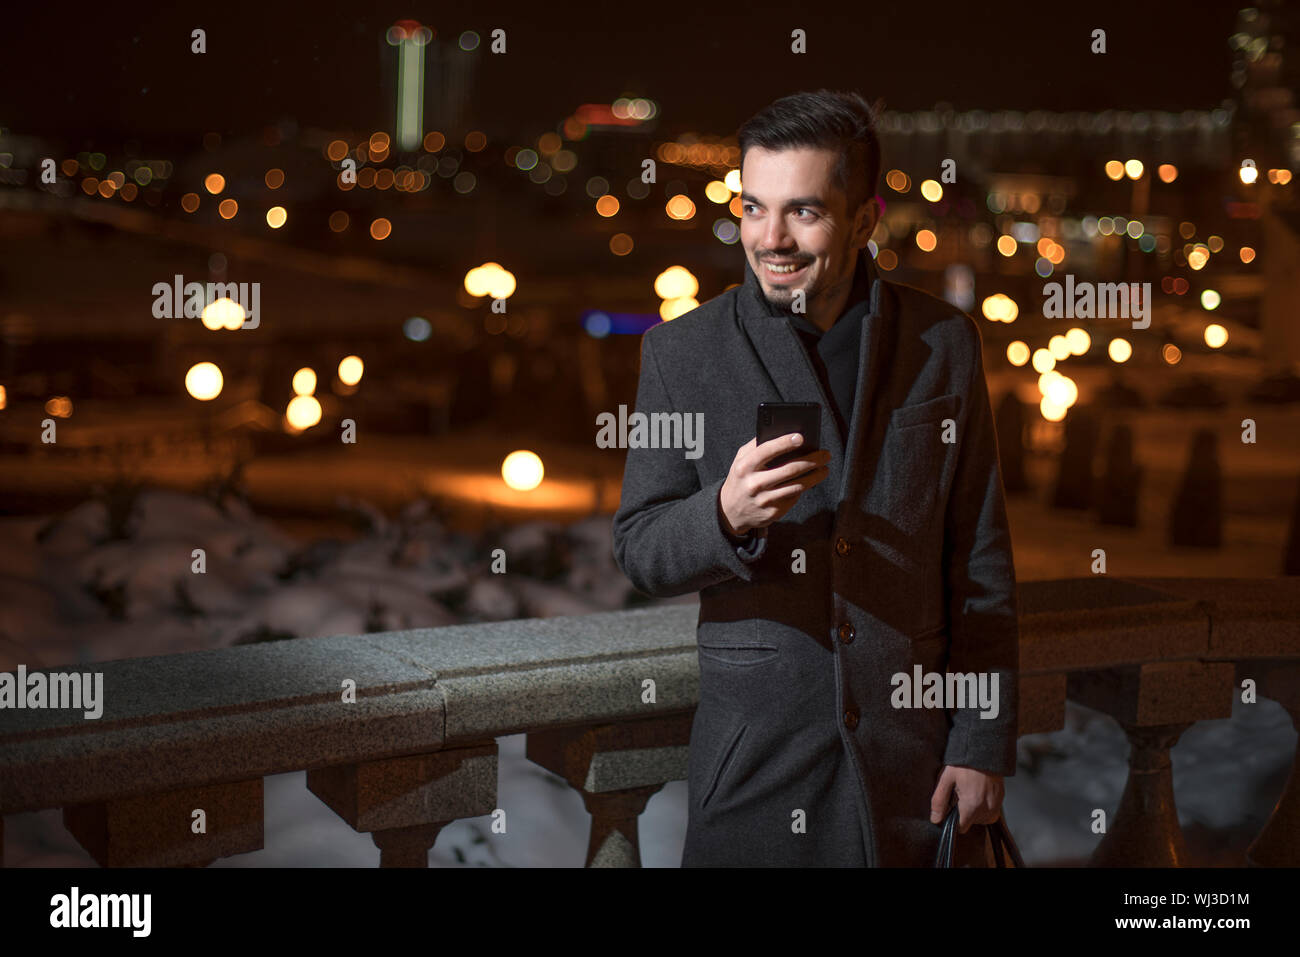 man in suit indoors looks at smartphone Stock Photo